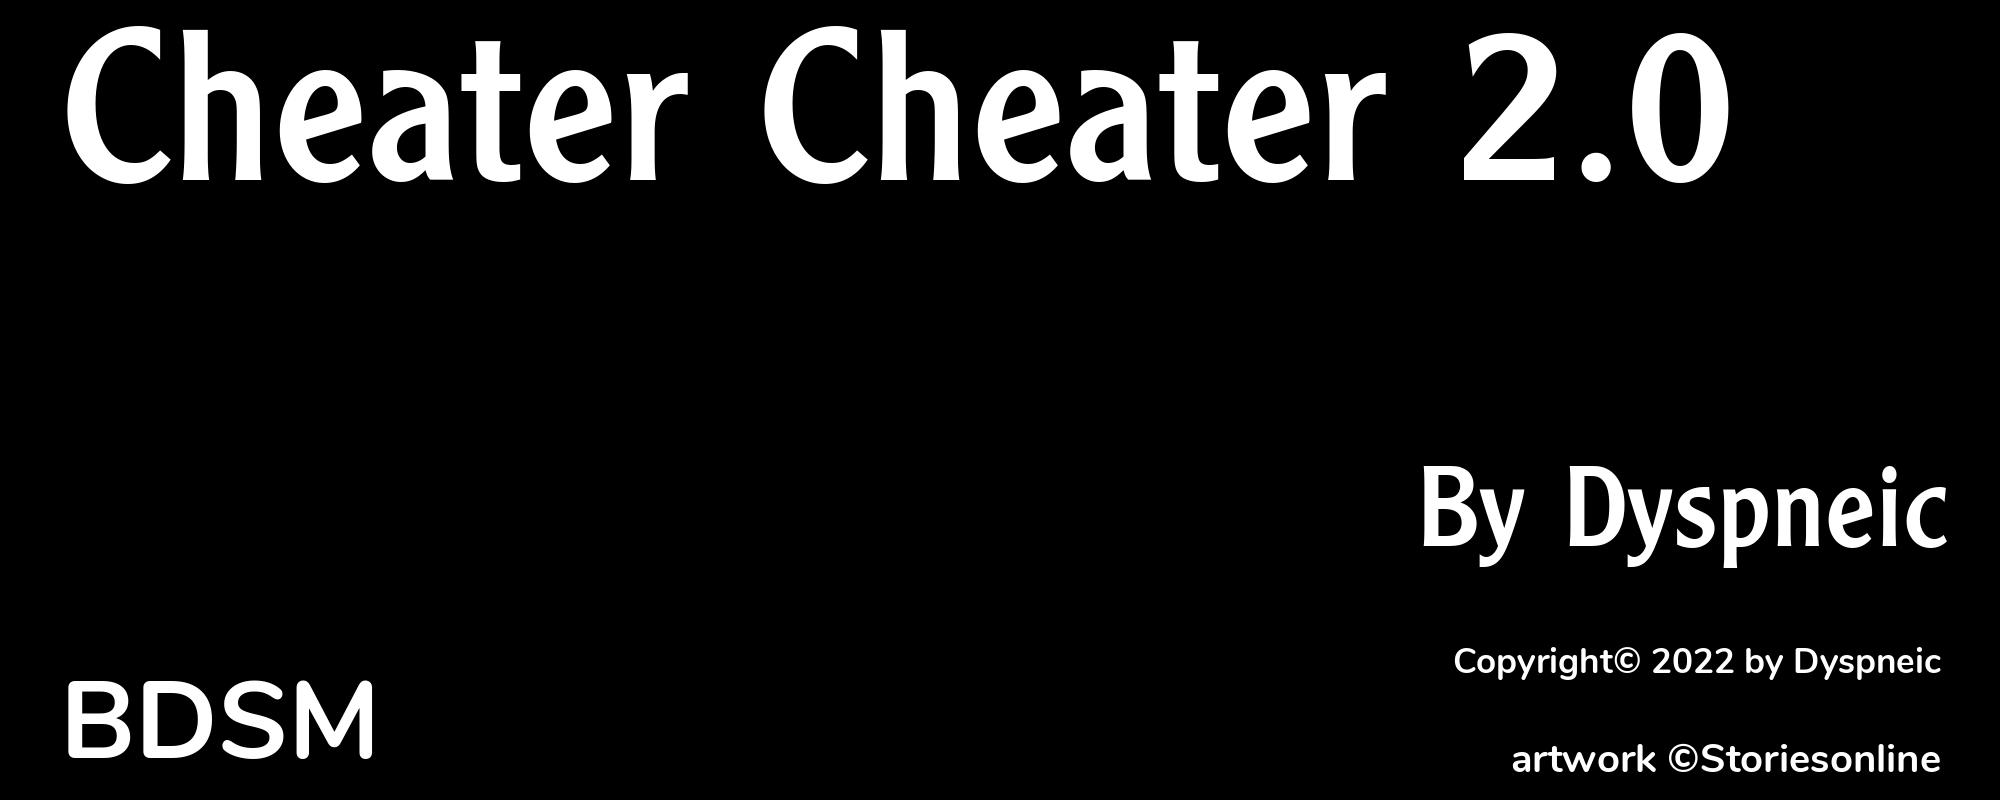 Cheater Cheater 2.0 - Cover